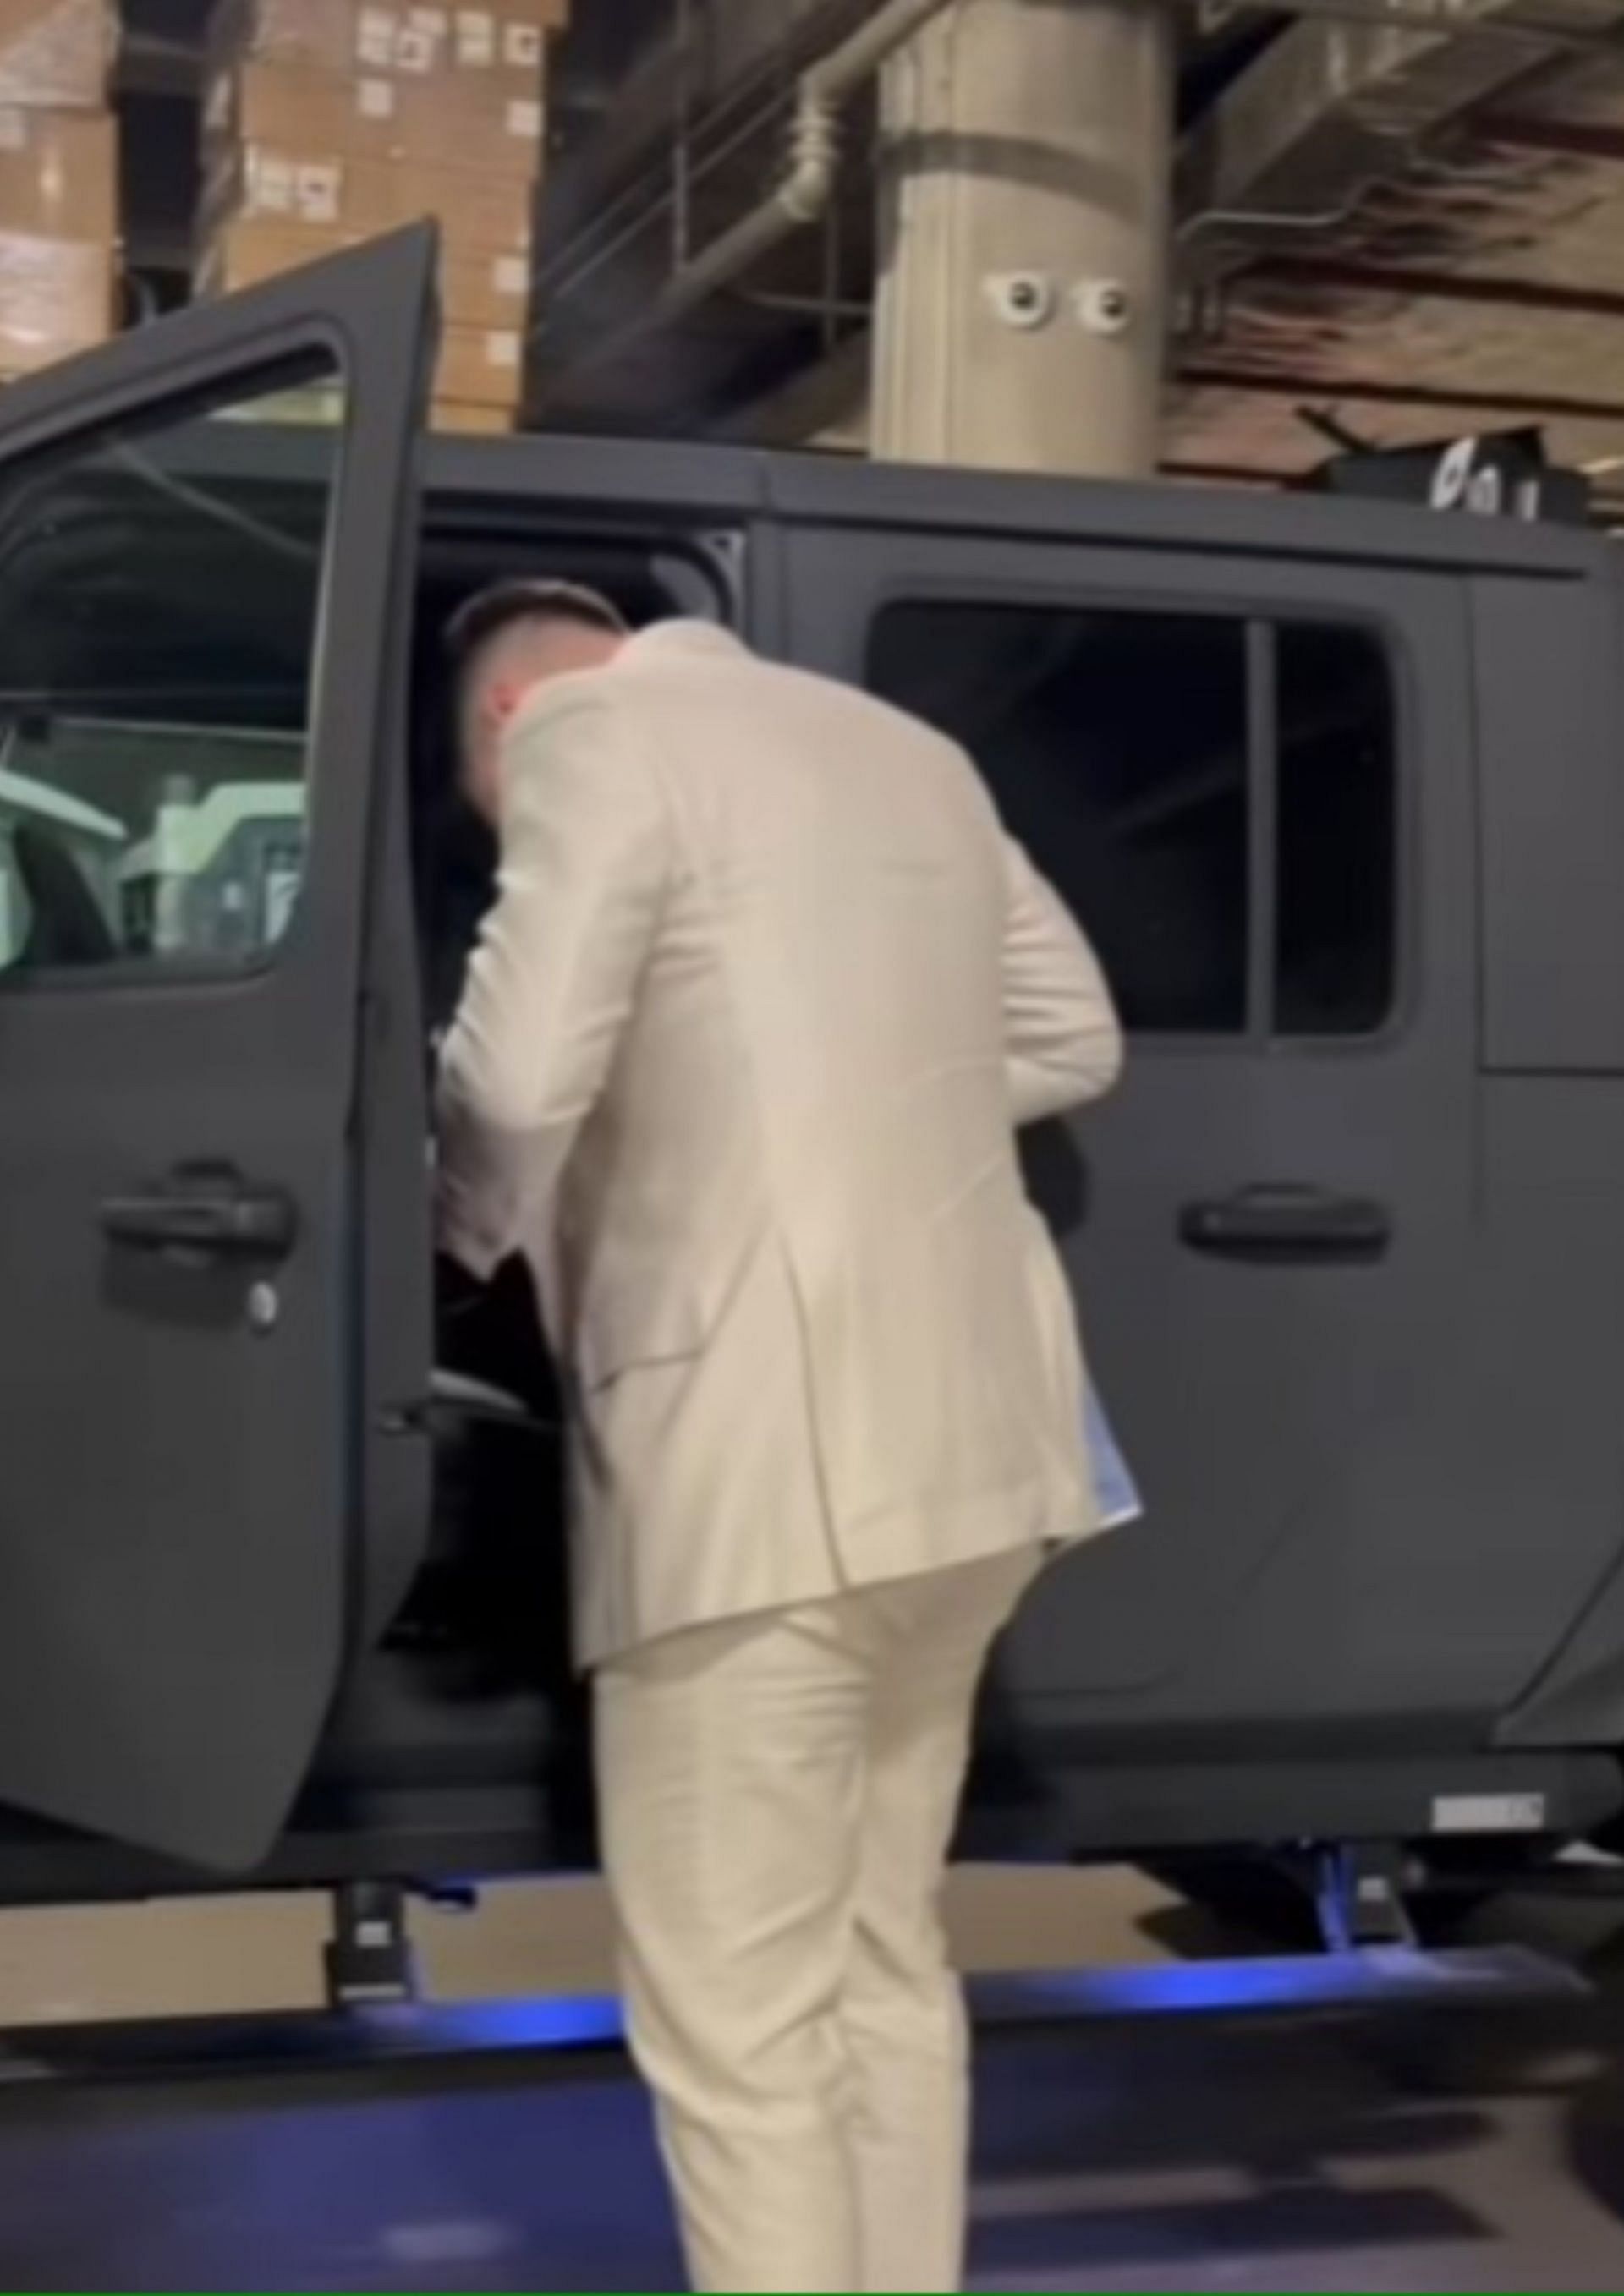 Doncic steps out of his $250k vehicle for Game 3.